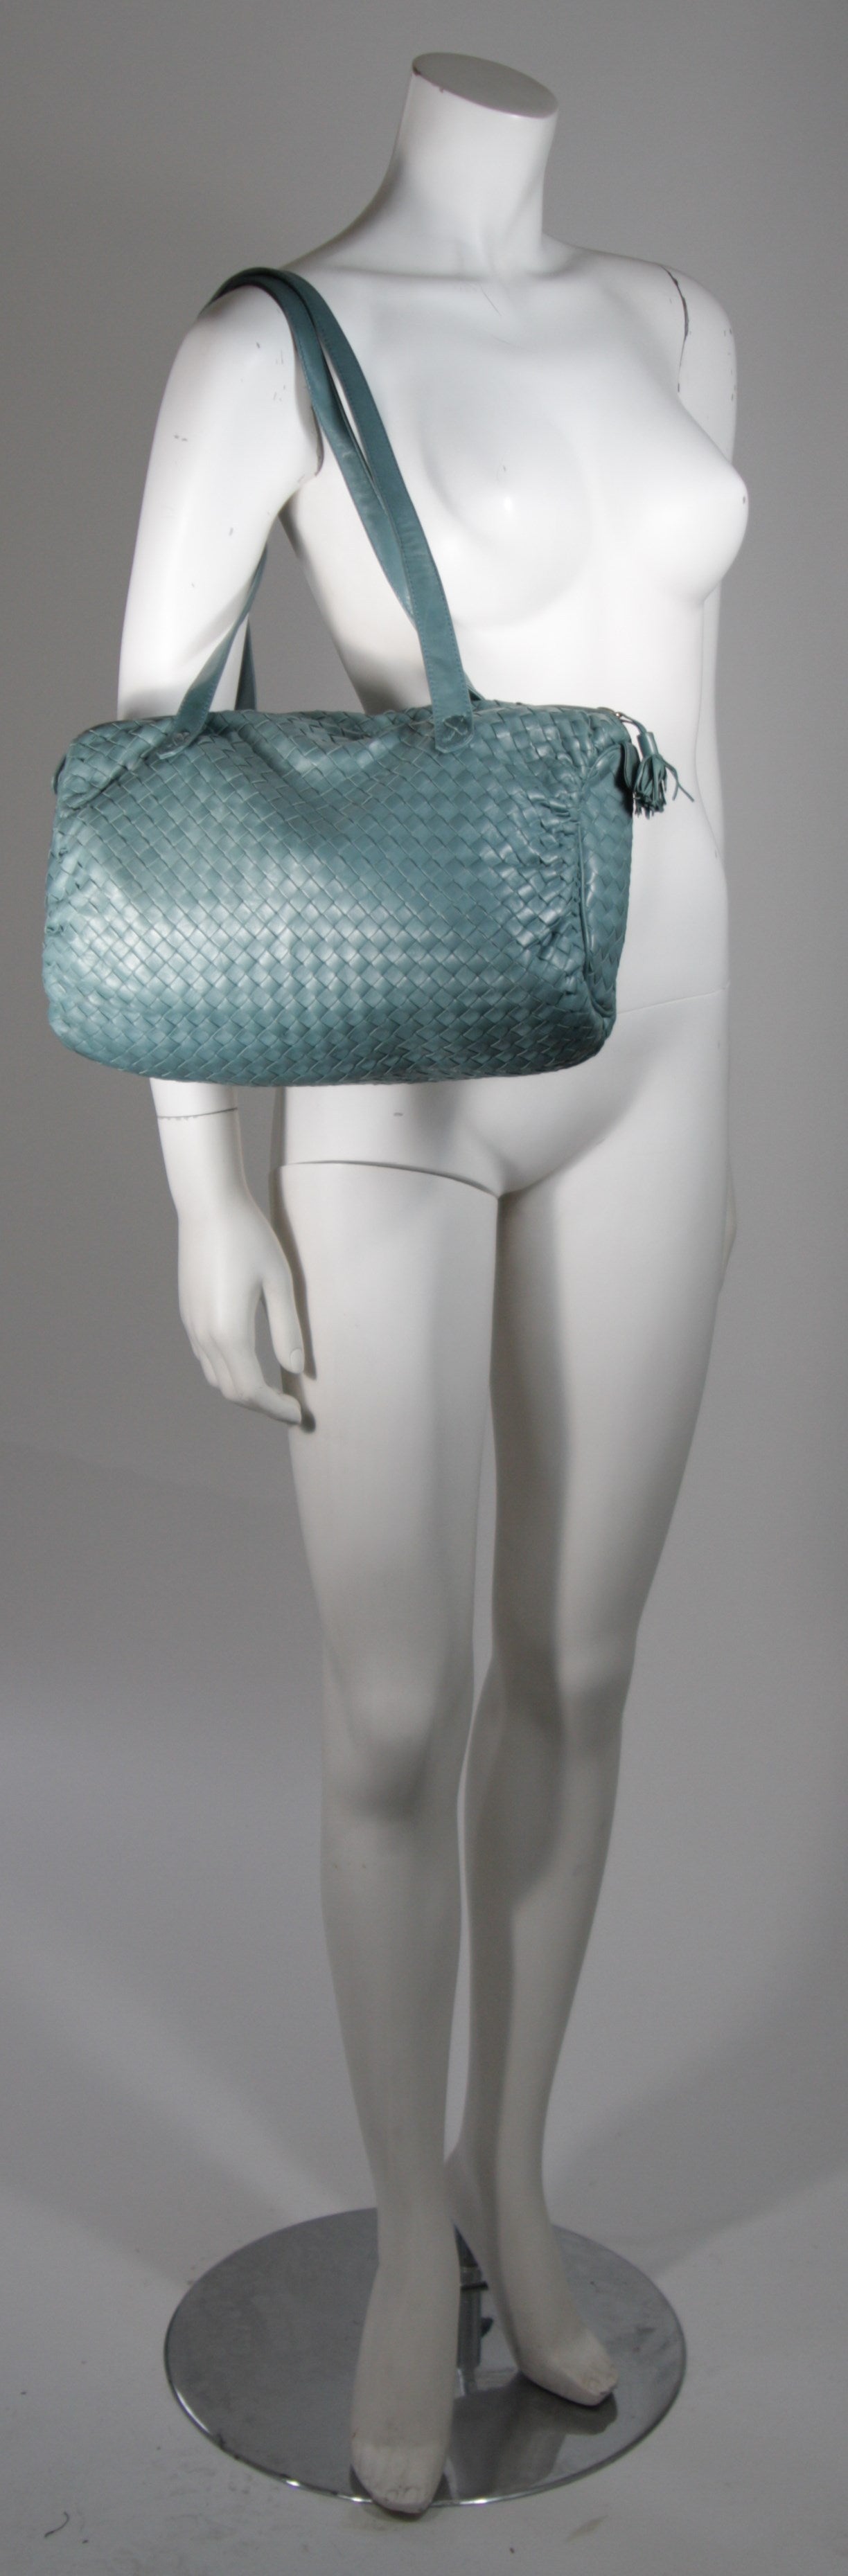 This vintage Bottega Veneta is available for viewing at our Beverly Hills Boutique. We offer a large selection of evening gowns and luxury garments.

This handbag is composed of a supple  teal leather in an interwoven fashion with gold hardware.